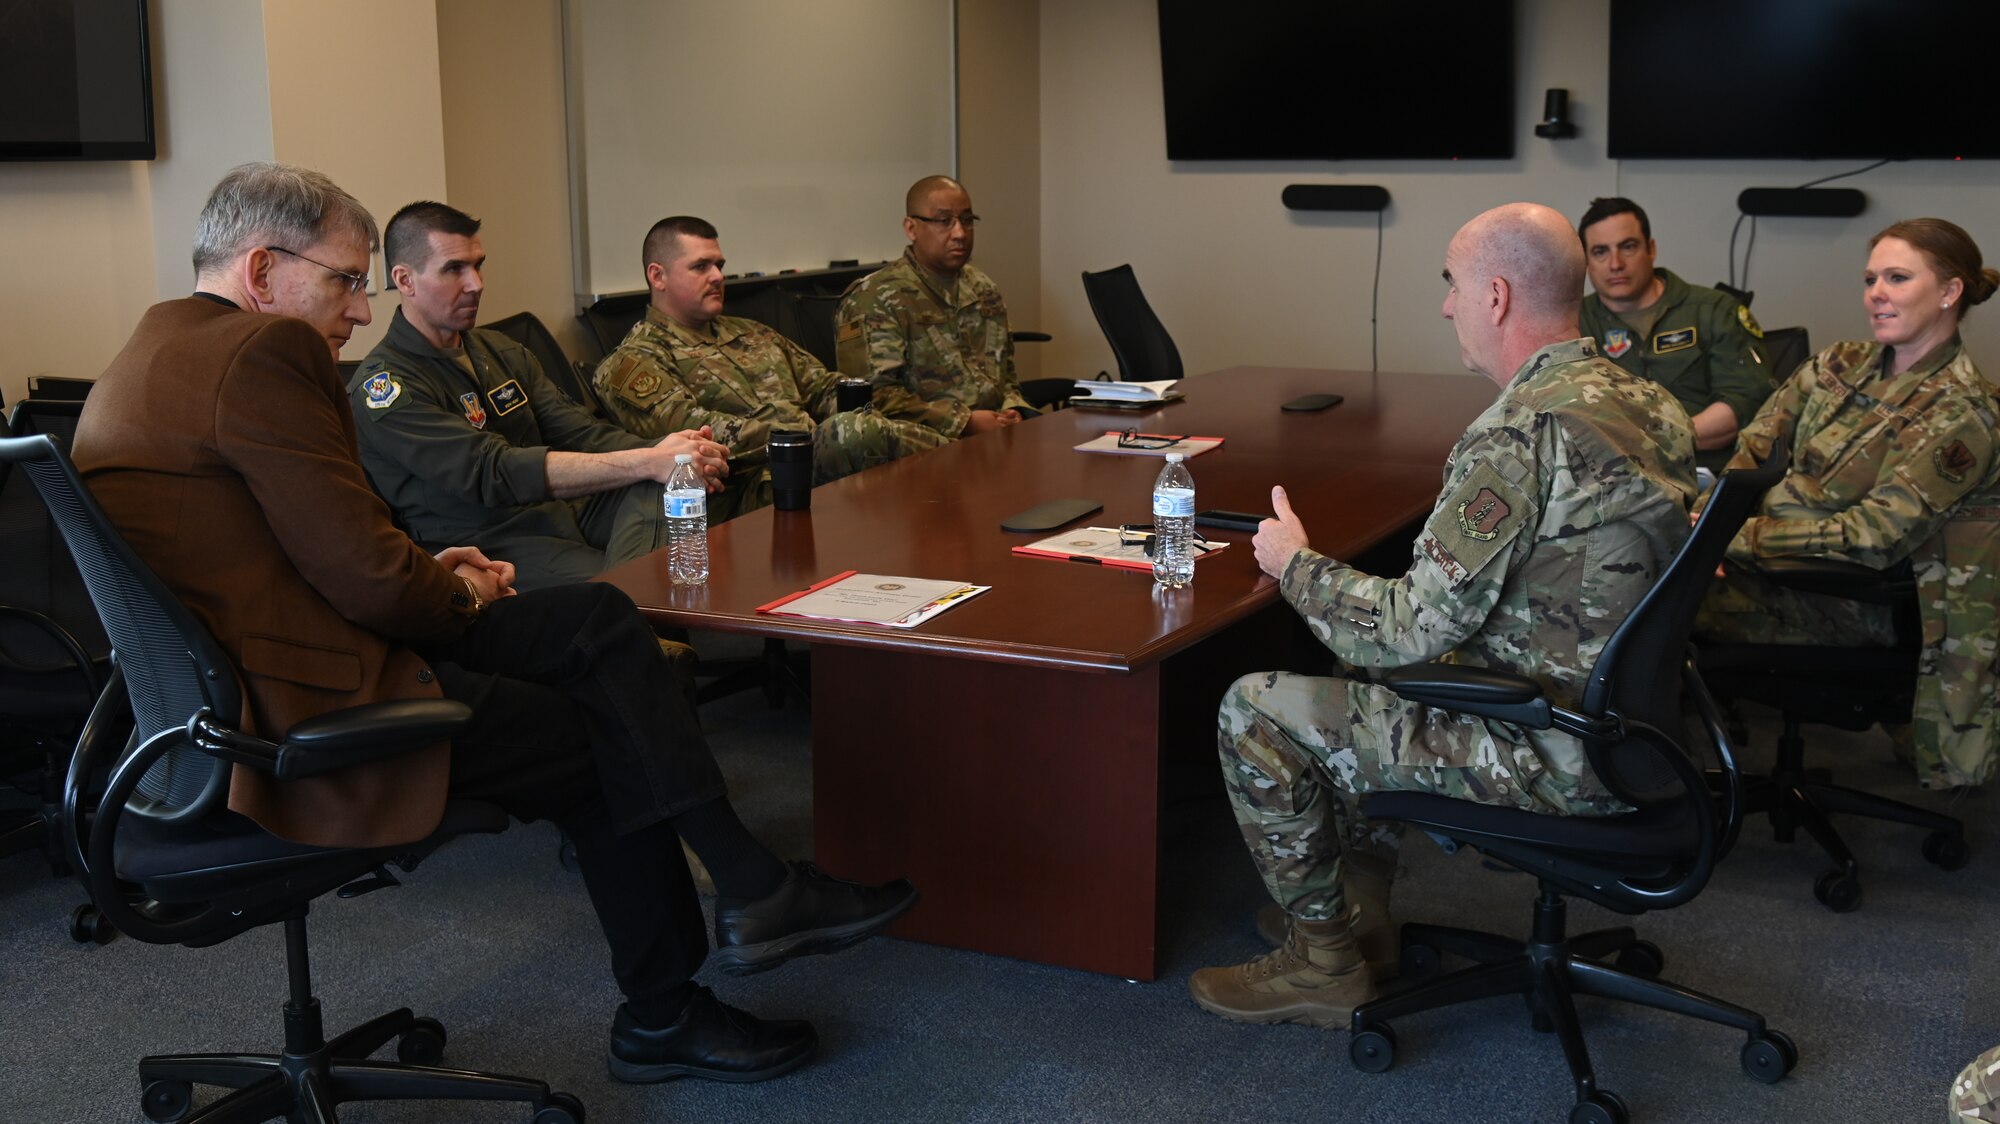 Mr. Devin Cate, (left), executive director, Air National Guard, receives a formal wing briefing from U.S. Air Force Brig. Gen. Edward Jones (right), assistant adjutant general-air, Maryland National Guard, March 5, 2022, during a visit to Warfield Air National Guard Base at Martin State Airport, Middle River, Maryland.  In addition to the briefing, Mr. Cate toured the base and had the opportunity to meet with Airmen and tour the facilities for the maintenance group, mission support group, and the cyberspace operations group. (U.S. Air National Guard photo by A1C Alexandra Huettner)